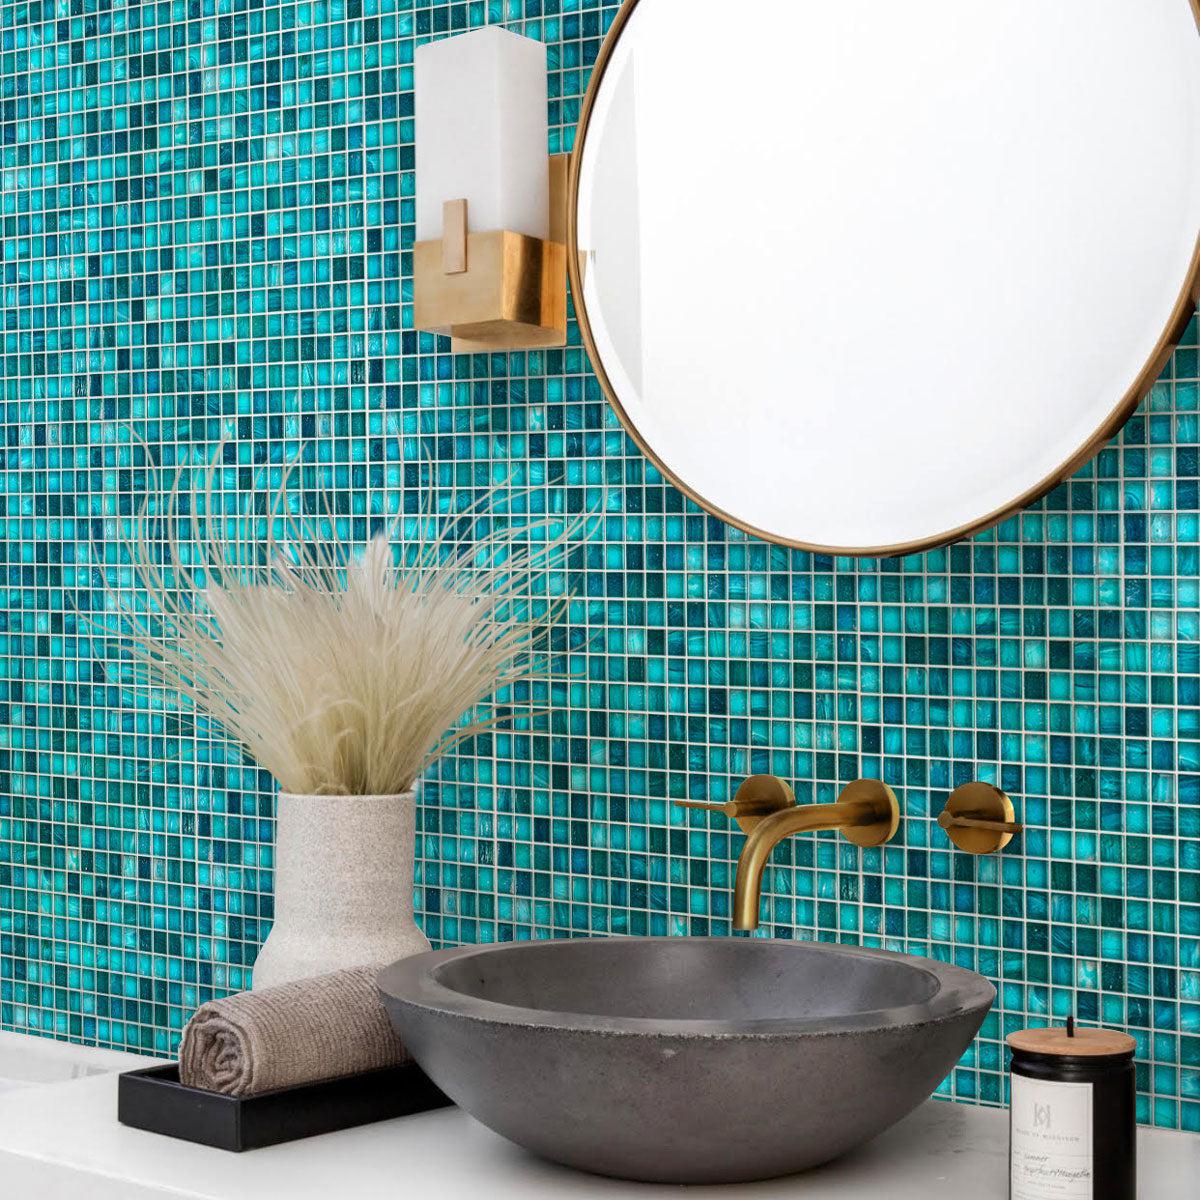 Lake Blue Mixed Squares Glass Tile adds a refreshing and tranquil ambiance